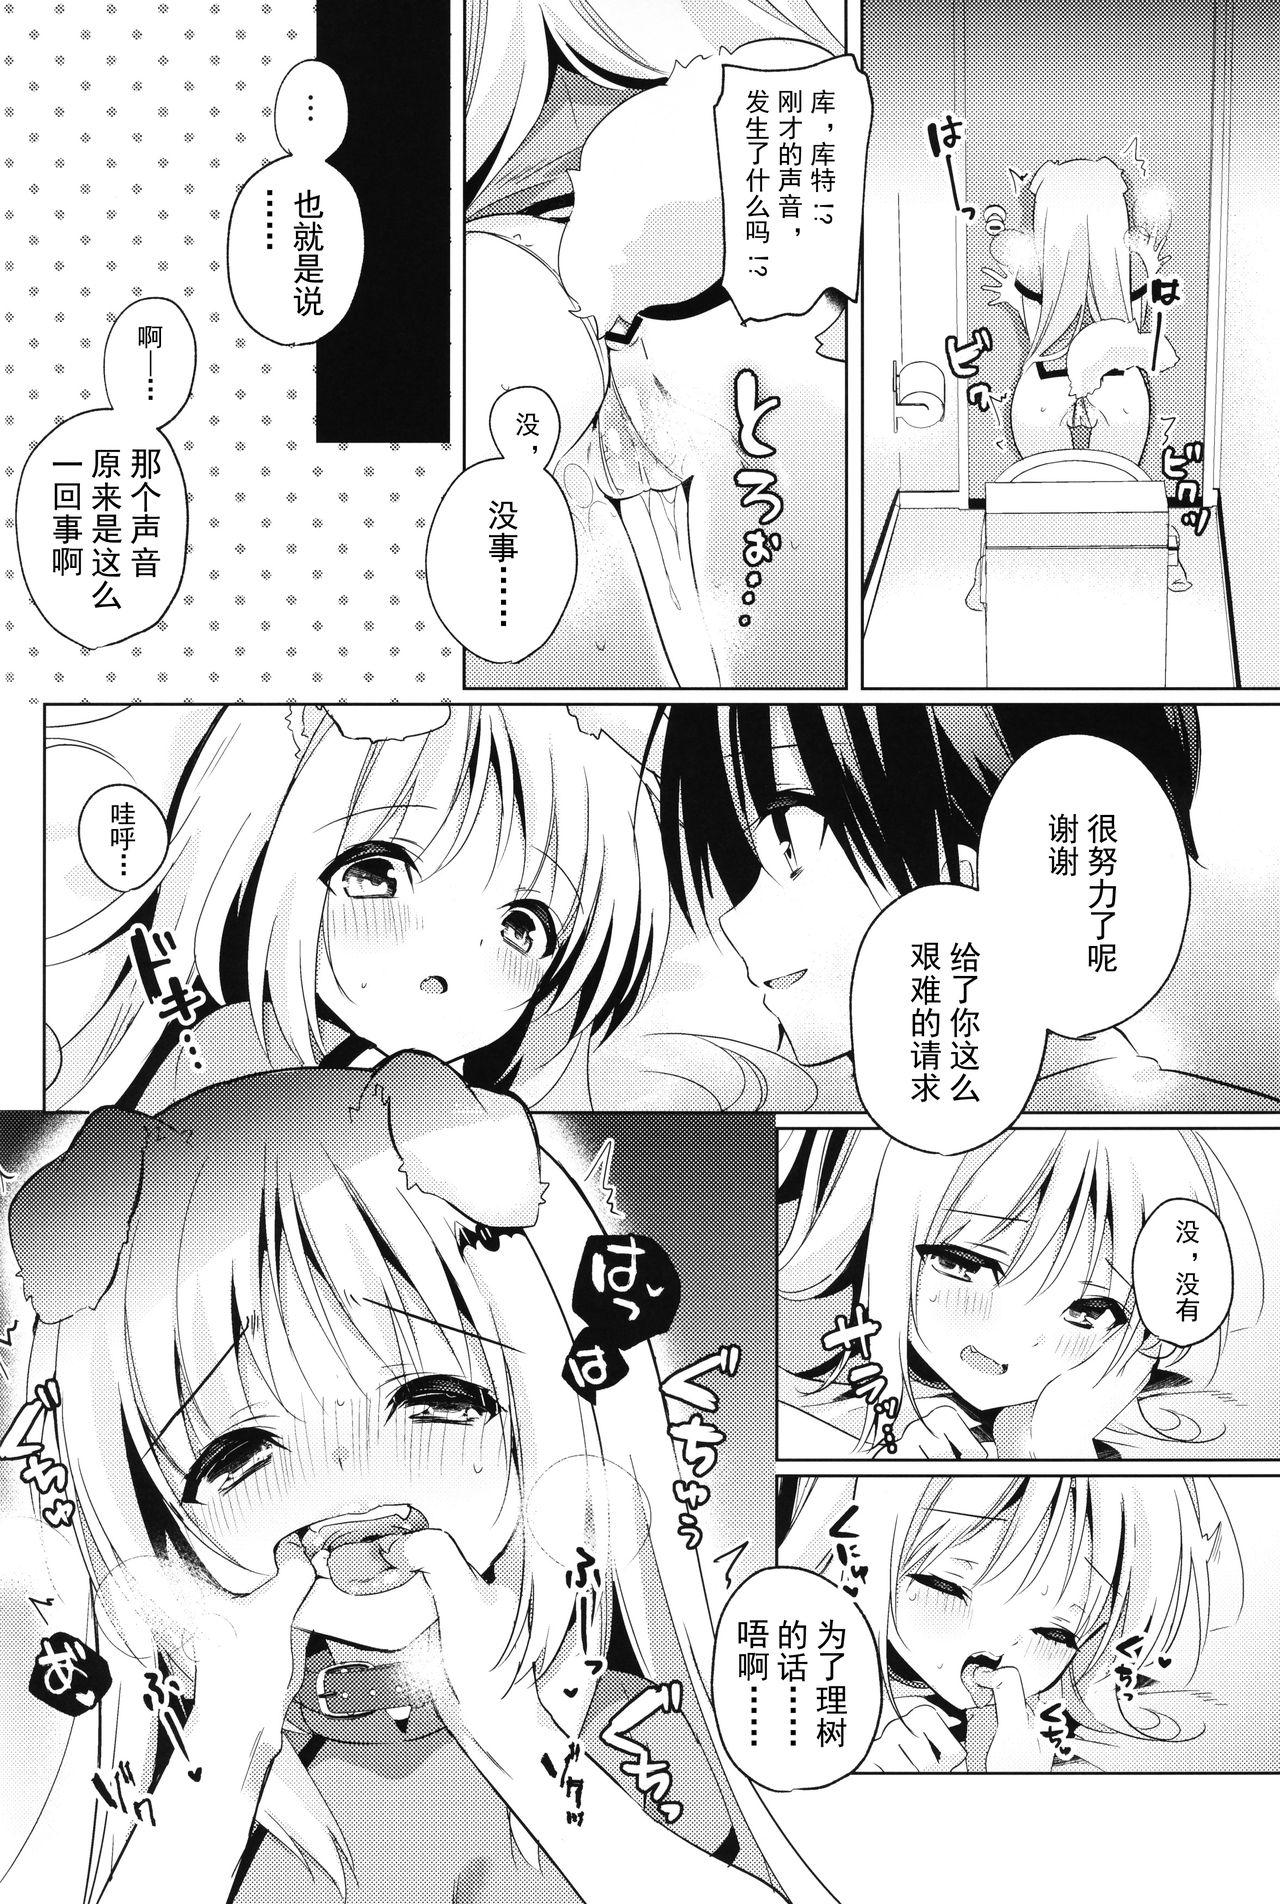 Sapphic Erotica Kud After4 - Little busters Movie - Page 10